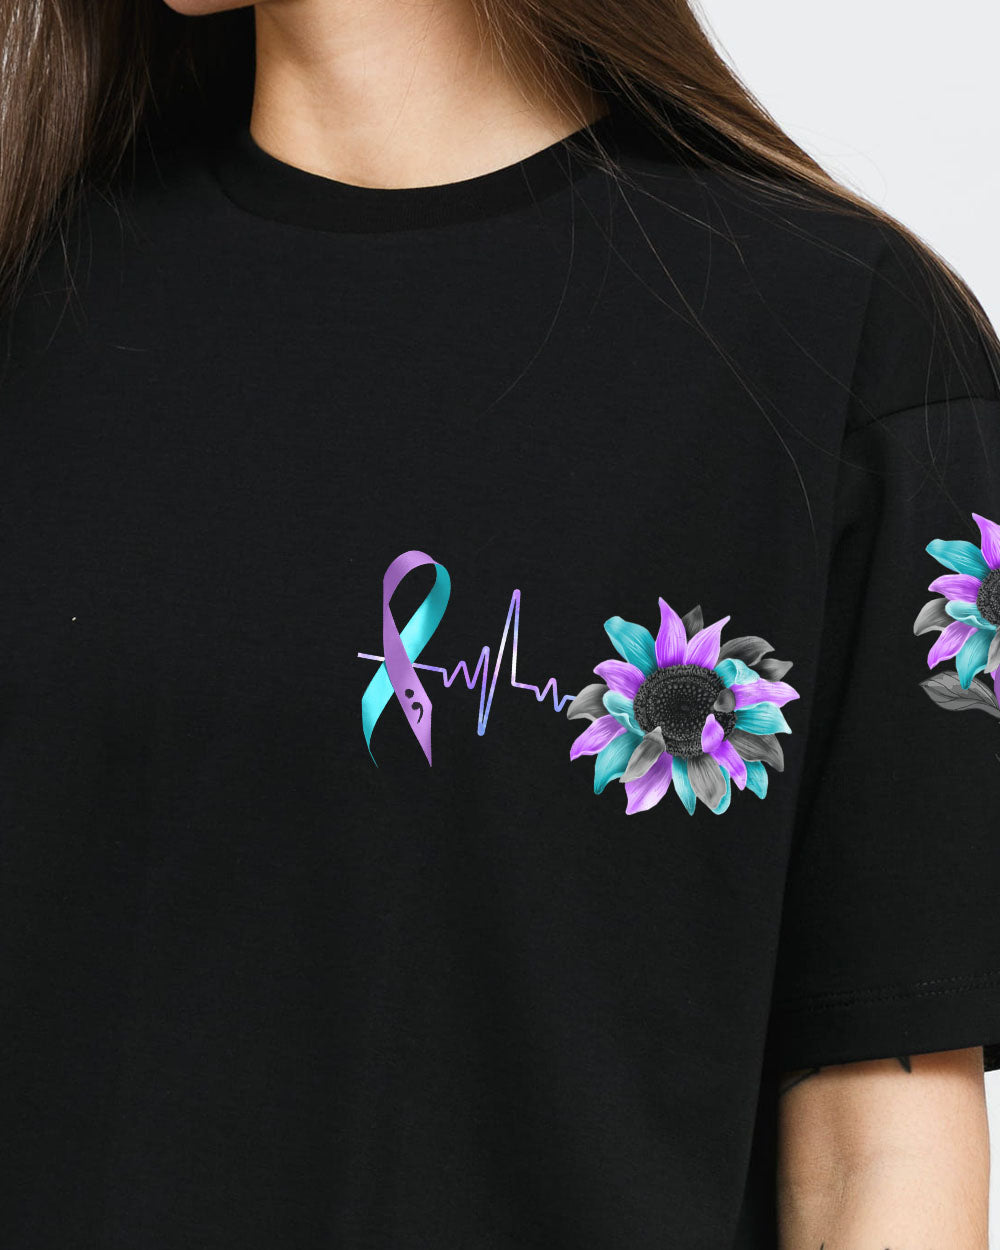 It's Okay If The Only Thing You Do Today Is Breathe Sunflower Smoke Ribbon Women's Suicide Prevention Awareness Tshirt